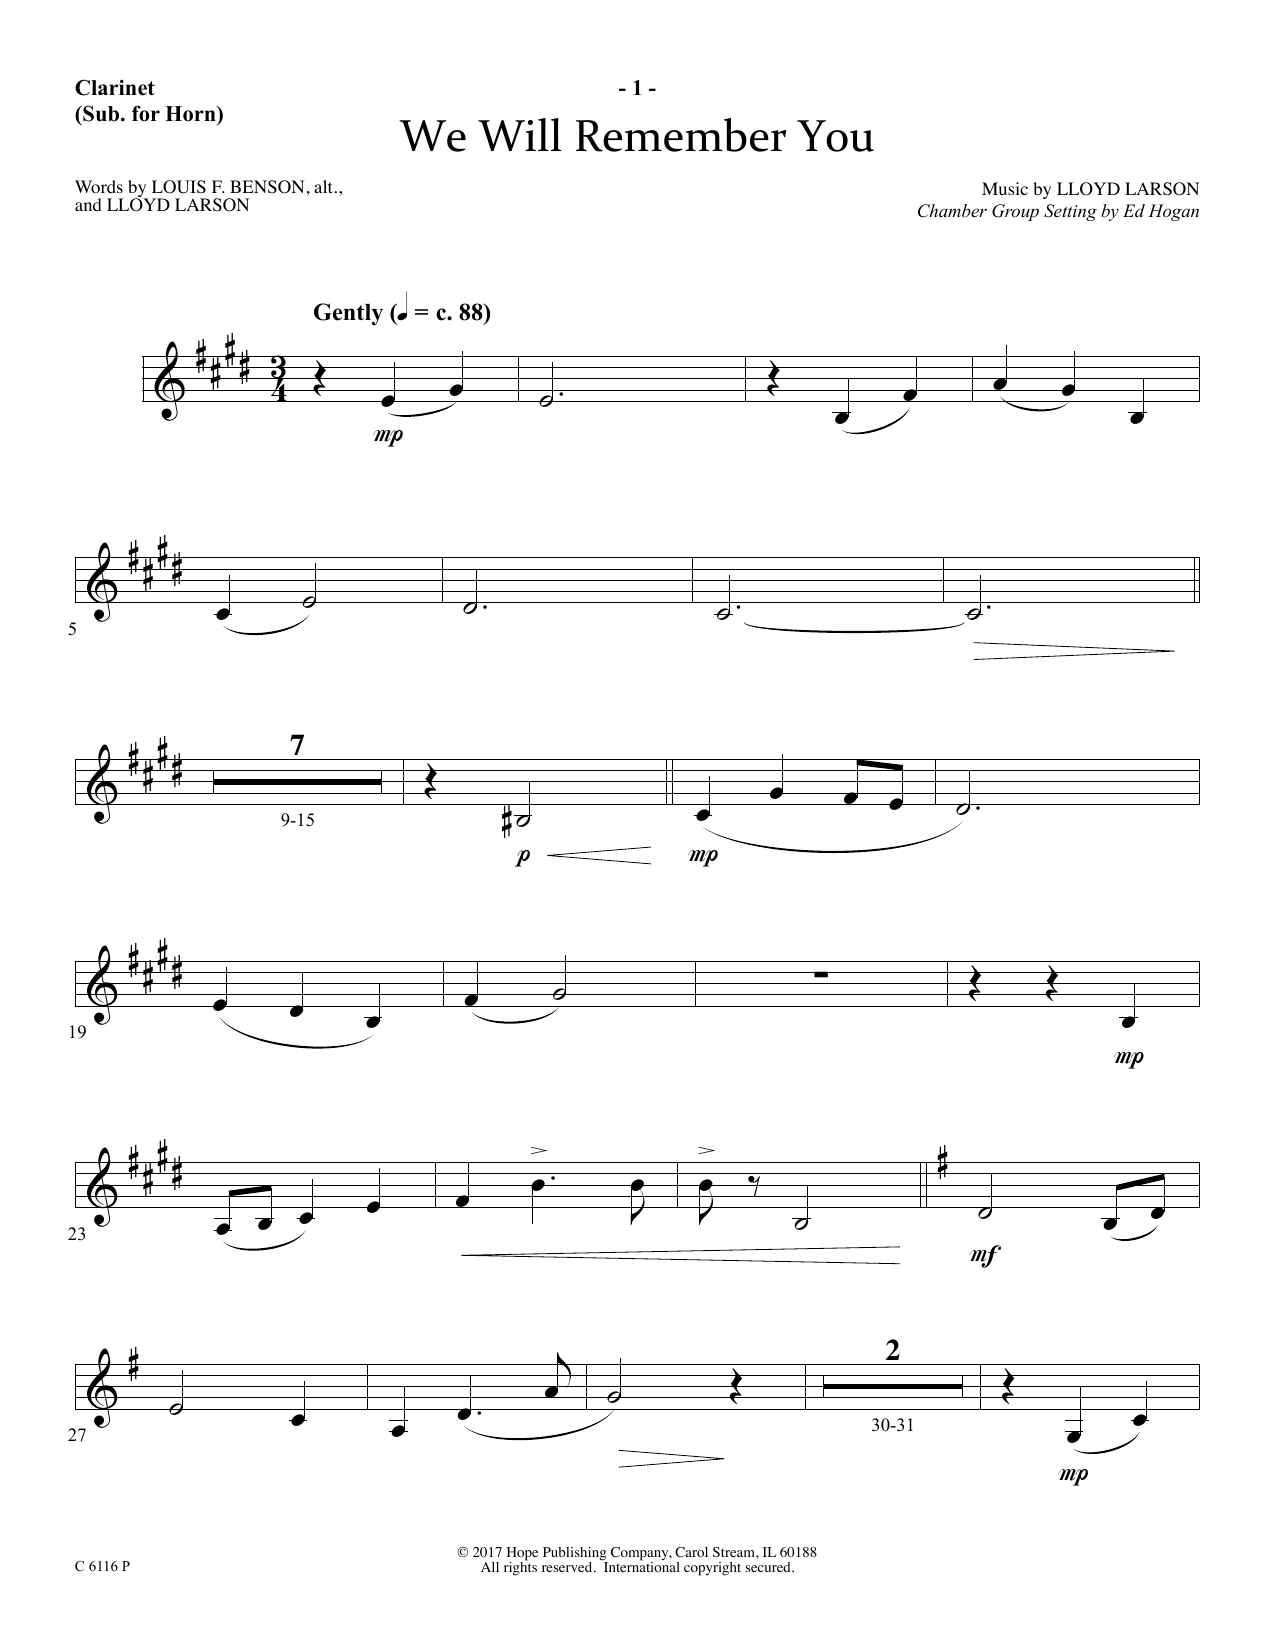 Download Ed Hogan We Will Remember You - Clarinet (sub. H Sheet Music